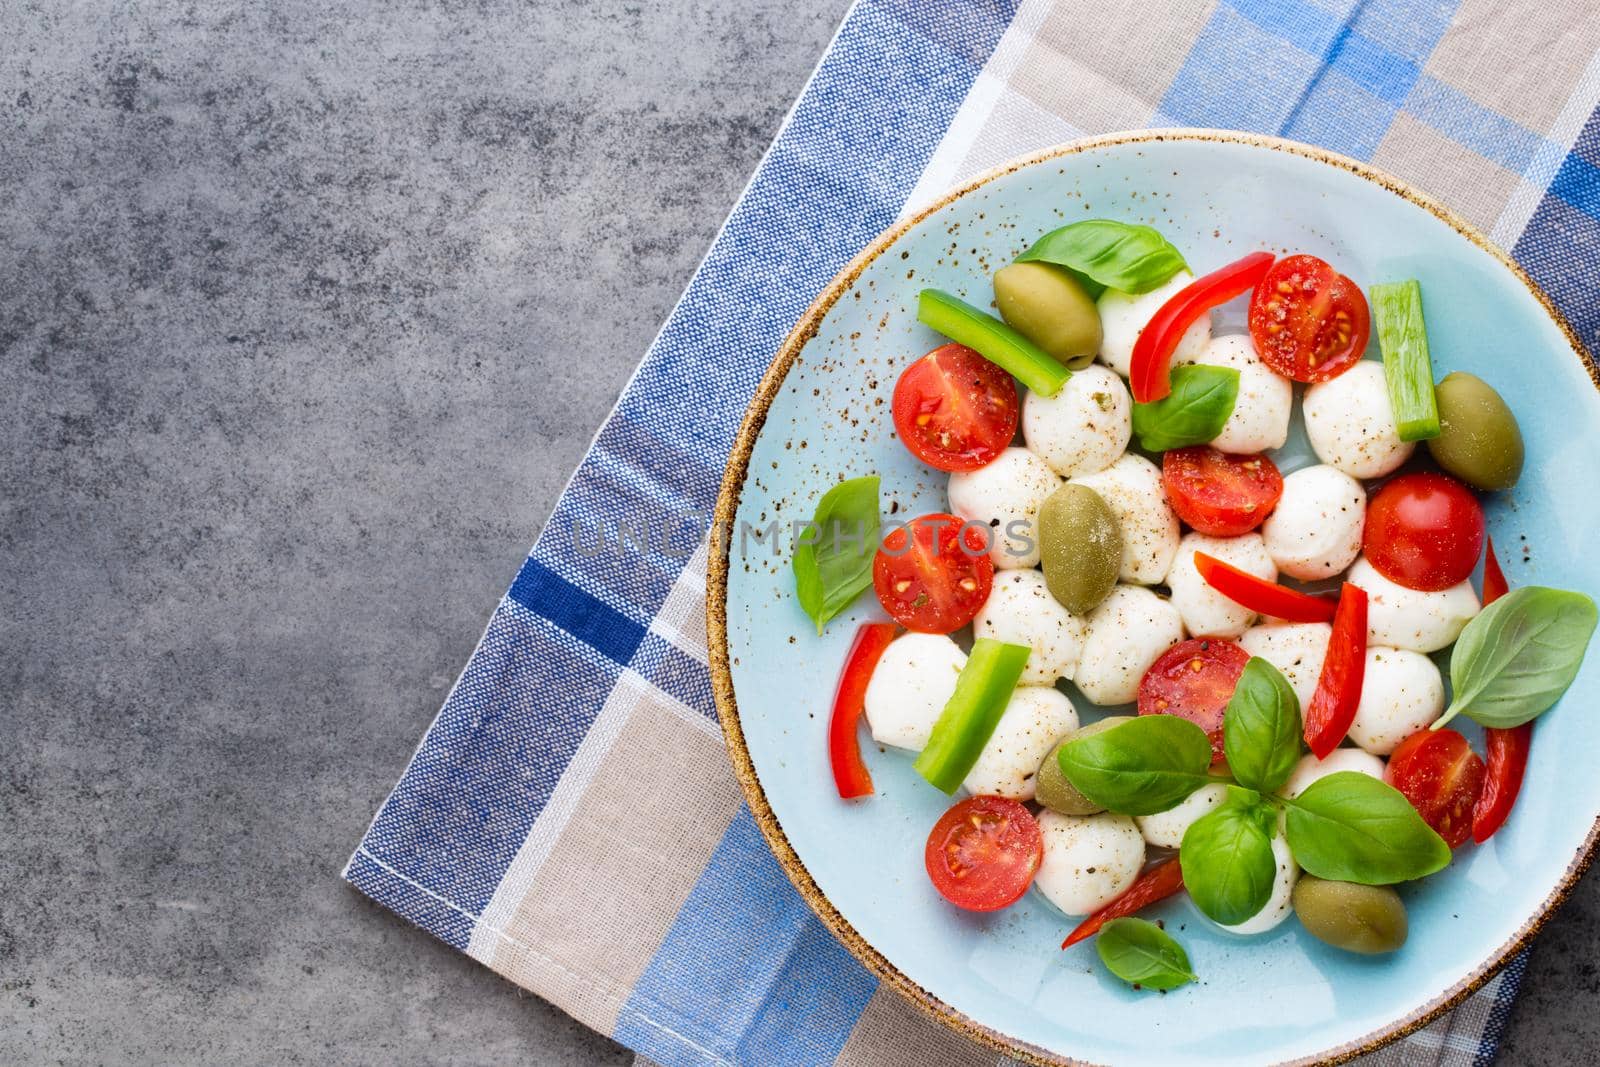 Delicious caprese salad with ripe cherry tomatoes and mini mozzarella cheese balls with fresh basil leaves.  by gitusik